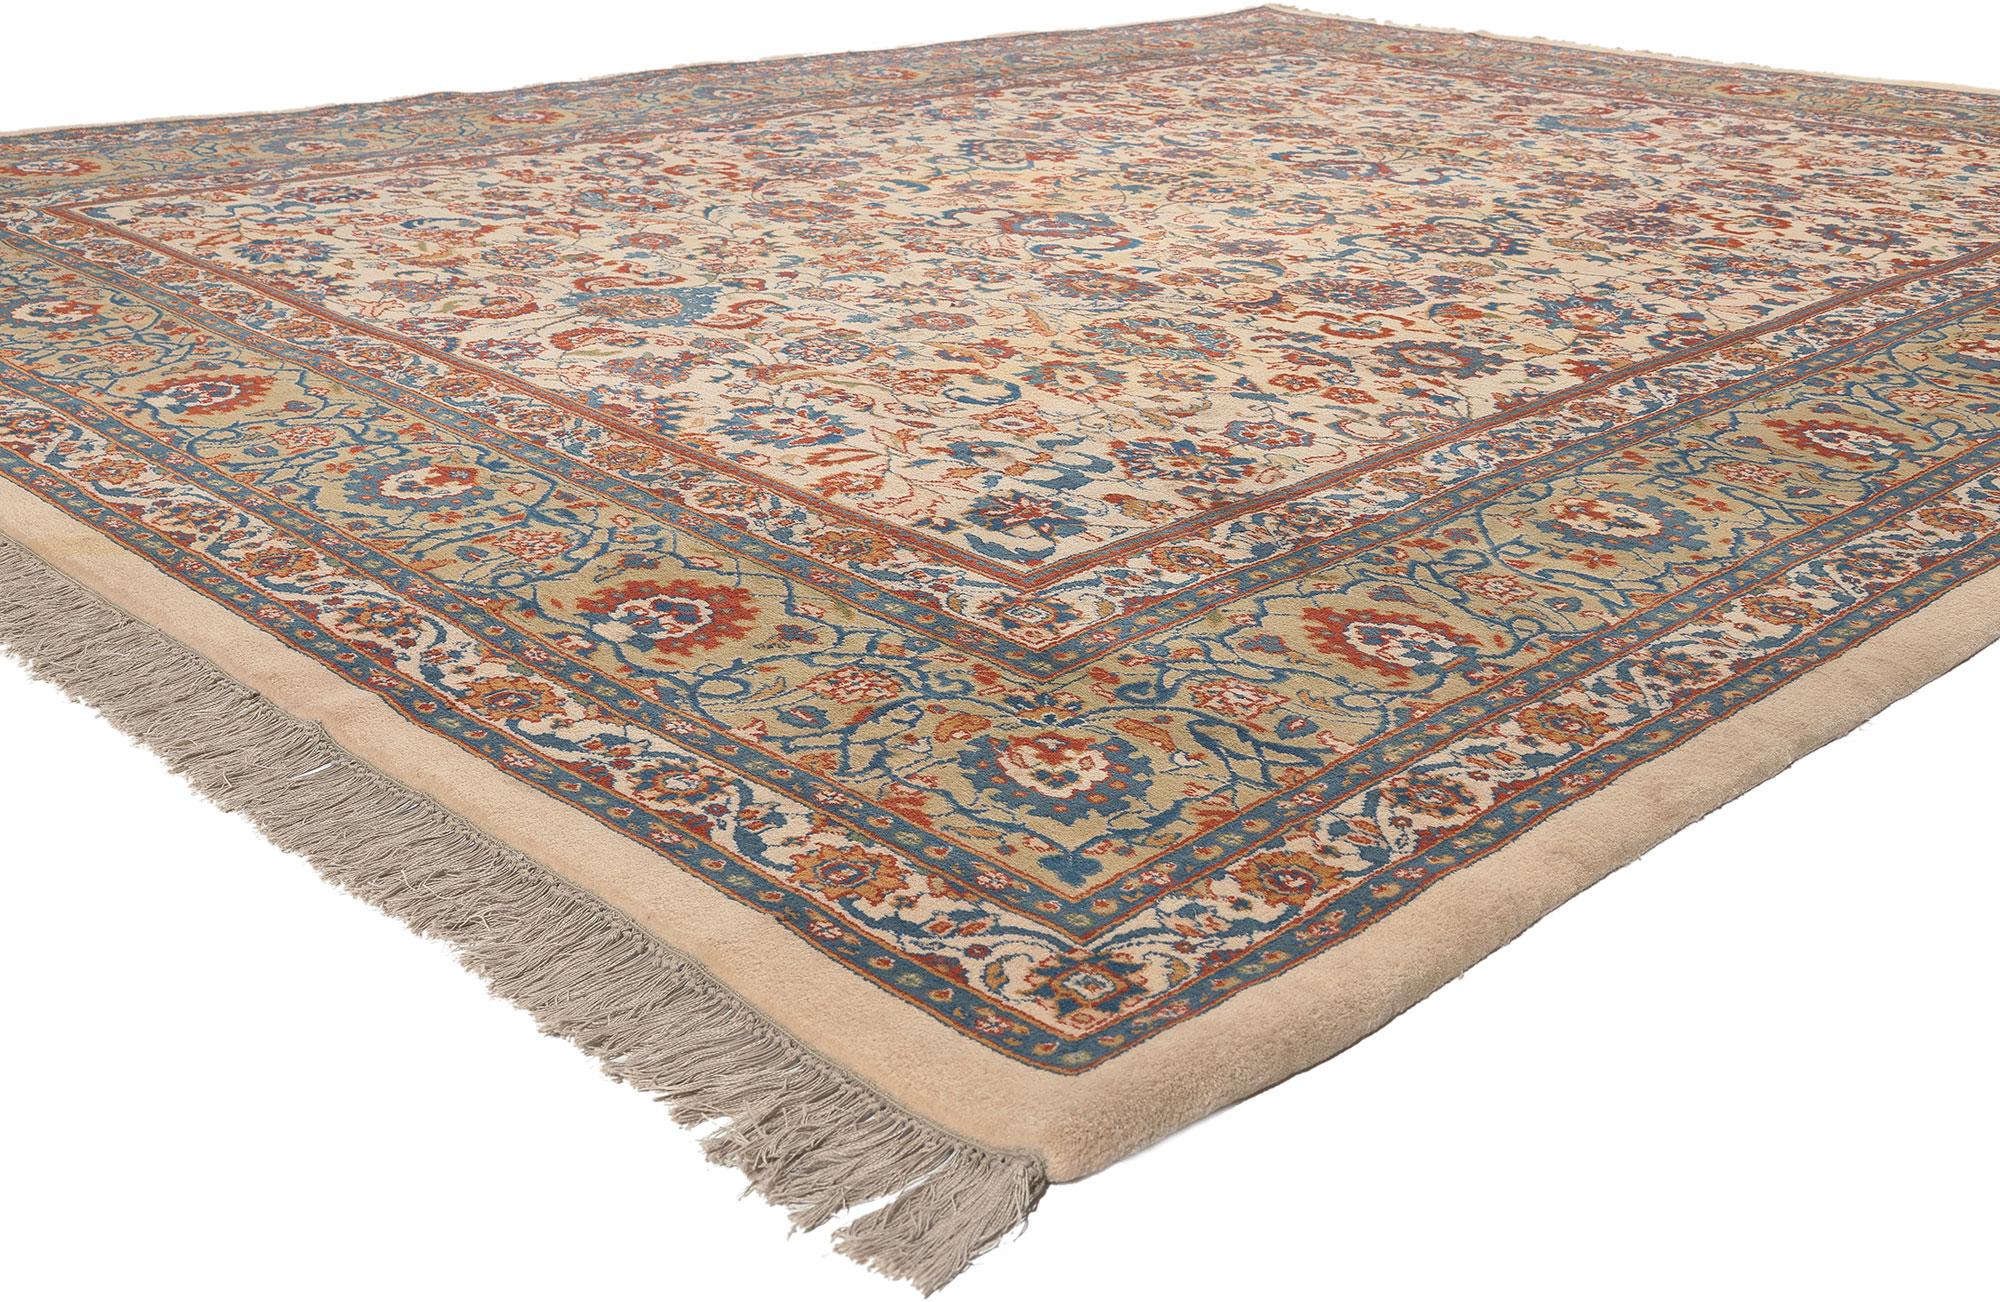 70265 Vintage Indian Tabriz Rug, 09’00 x 12’00. 
Traditional sensibility meets timeless elegance in this hand knotted wool vintage Indian Tabriz rug. The decorative botanical design and sophisticated color palette woven into this piece work together